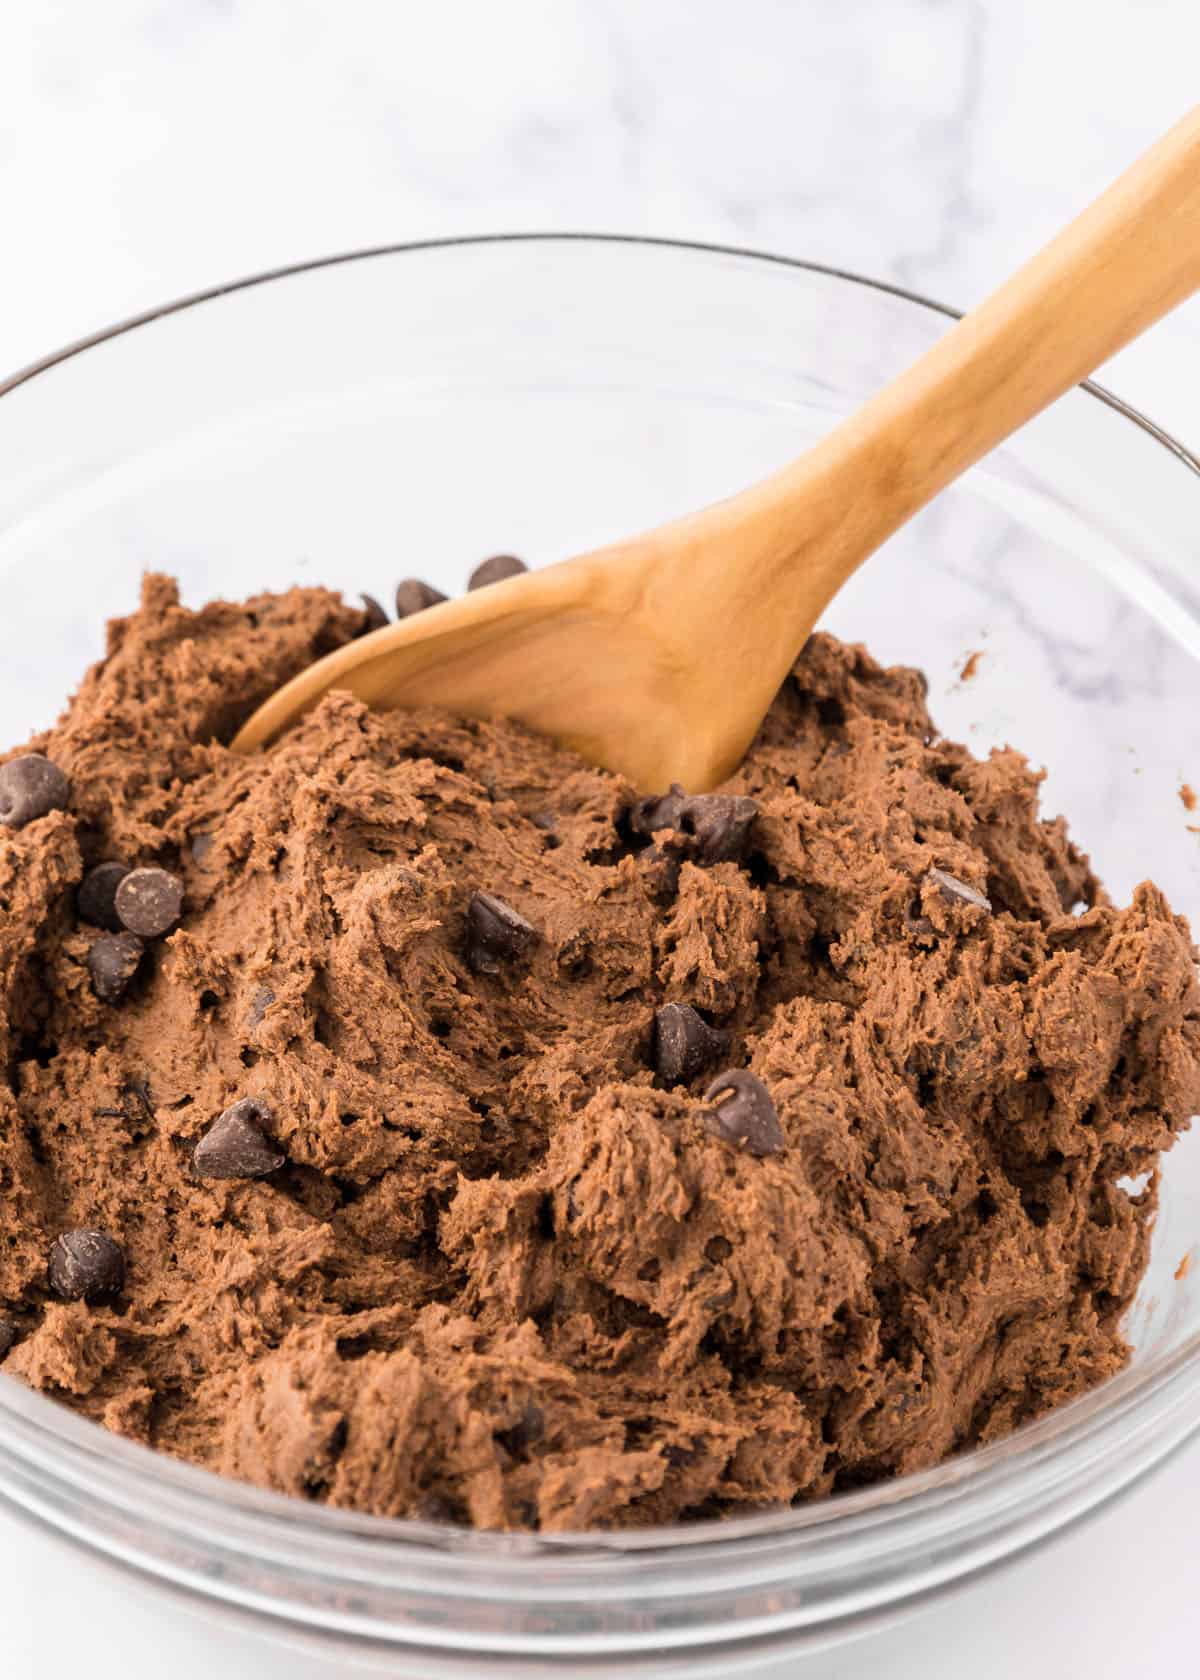 Double chocolate chip cookie dough in a bowl with a wooden spoon.